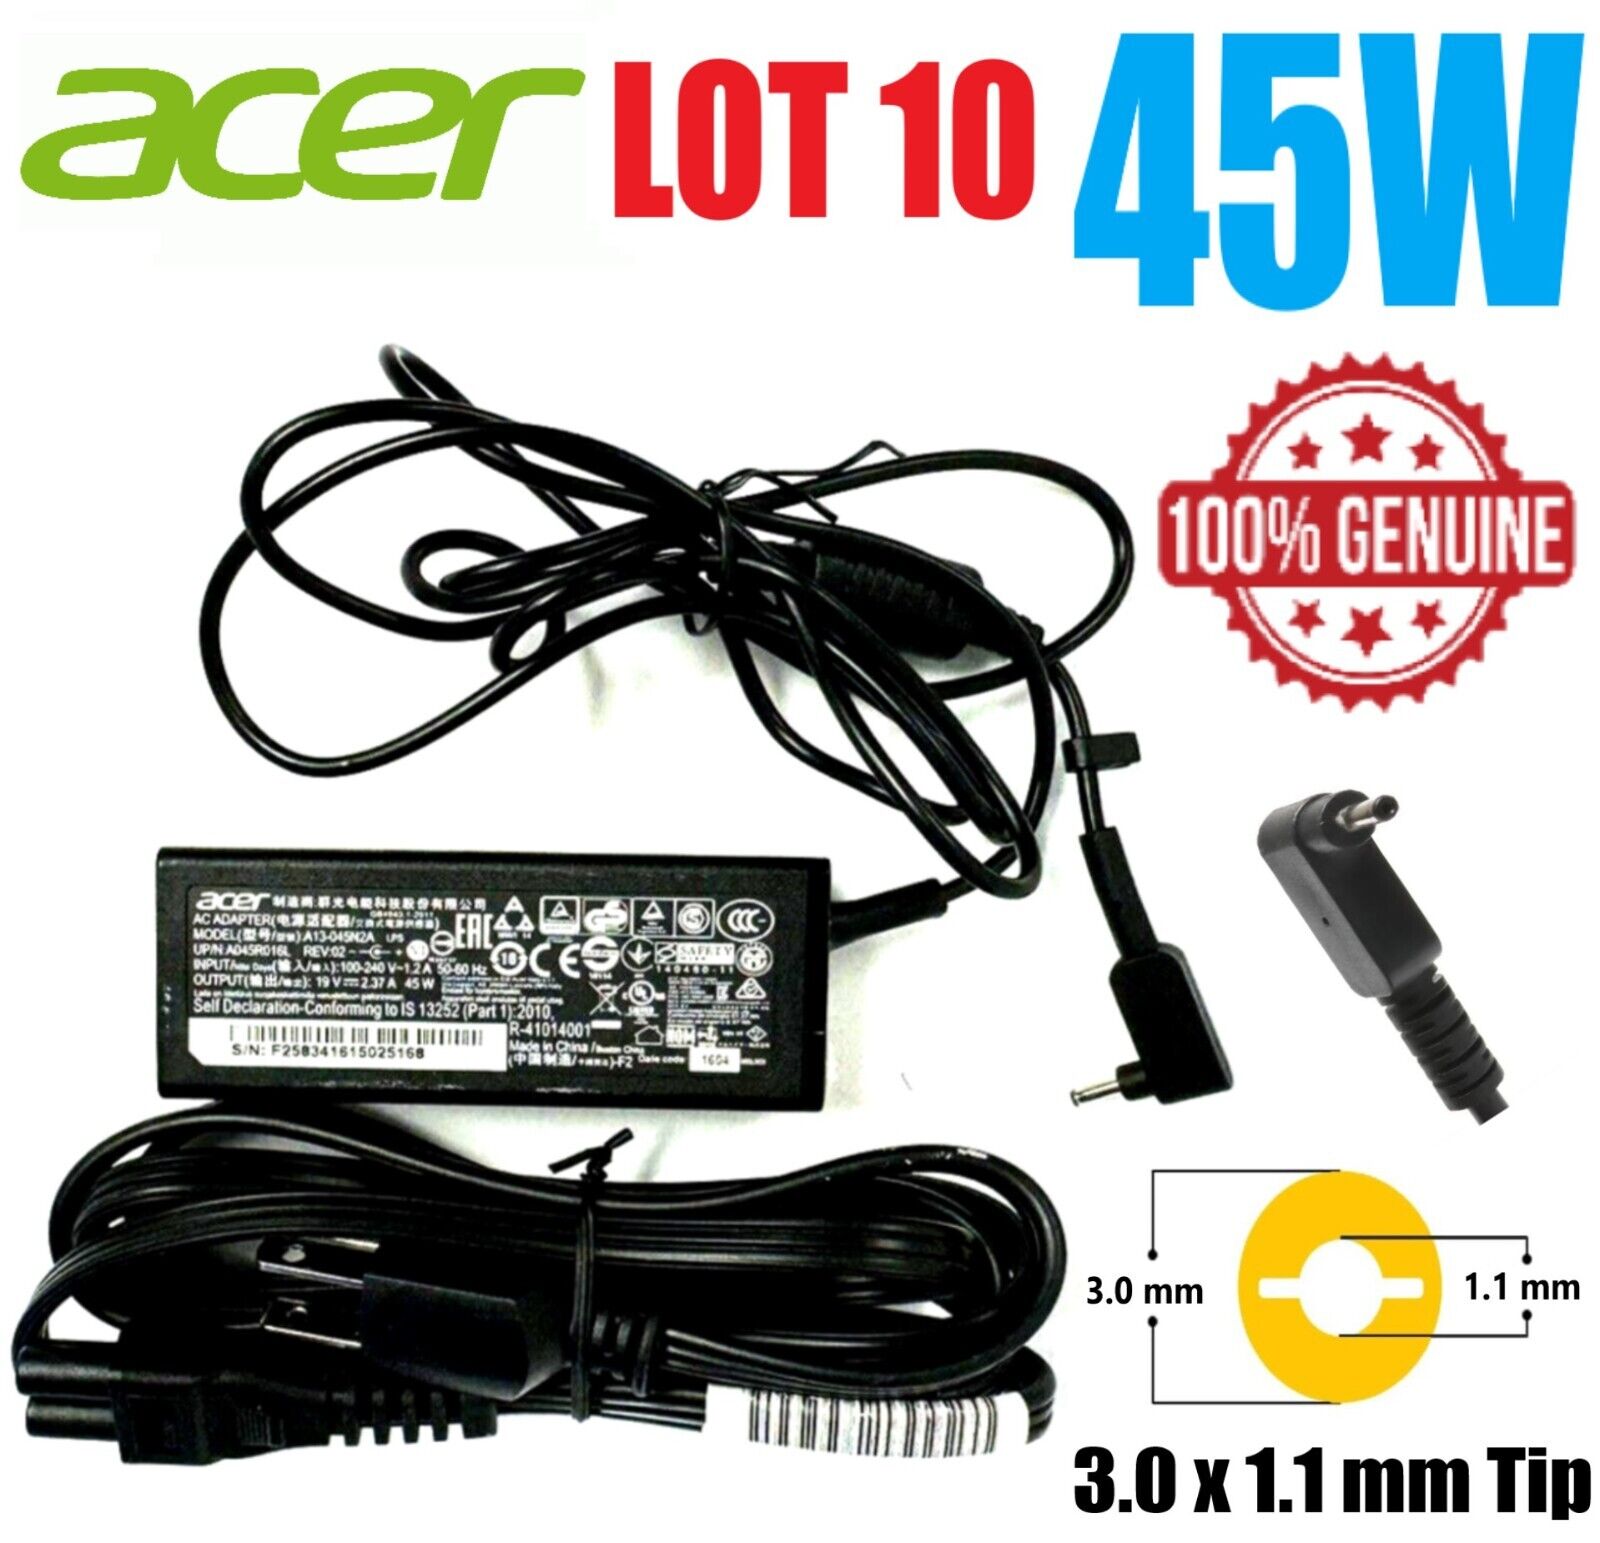 LOT 10 Genuine Acer 45W 19V 2.37A AC Adapter Power Charger PA-1450-26 A13-045N2A